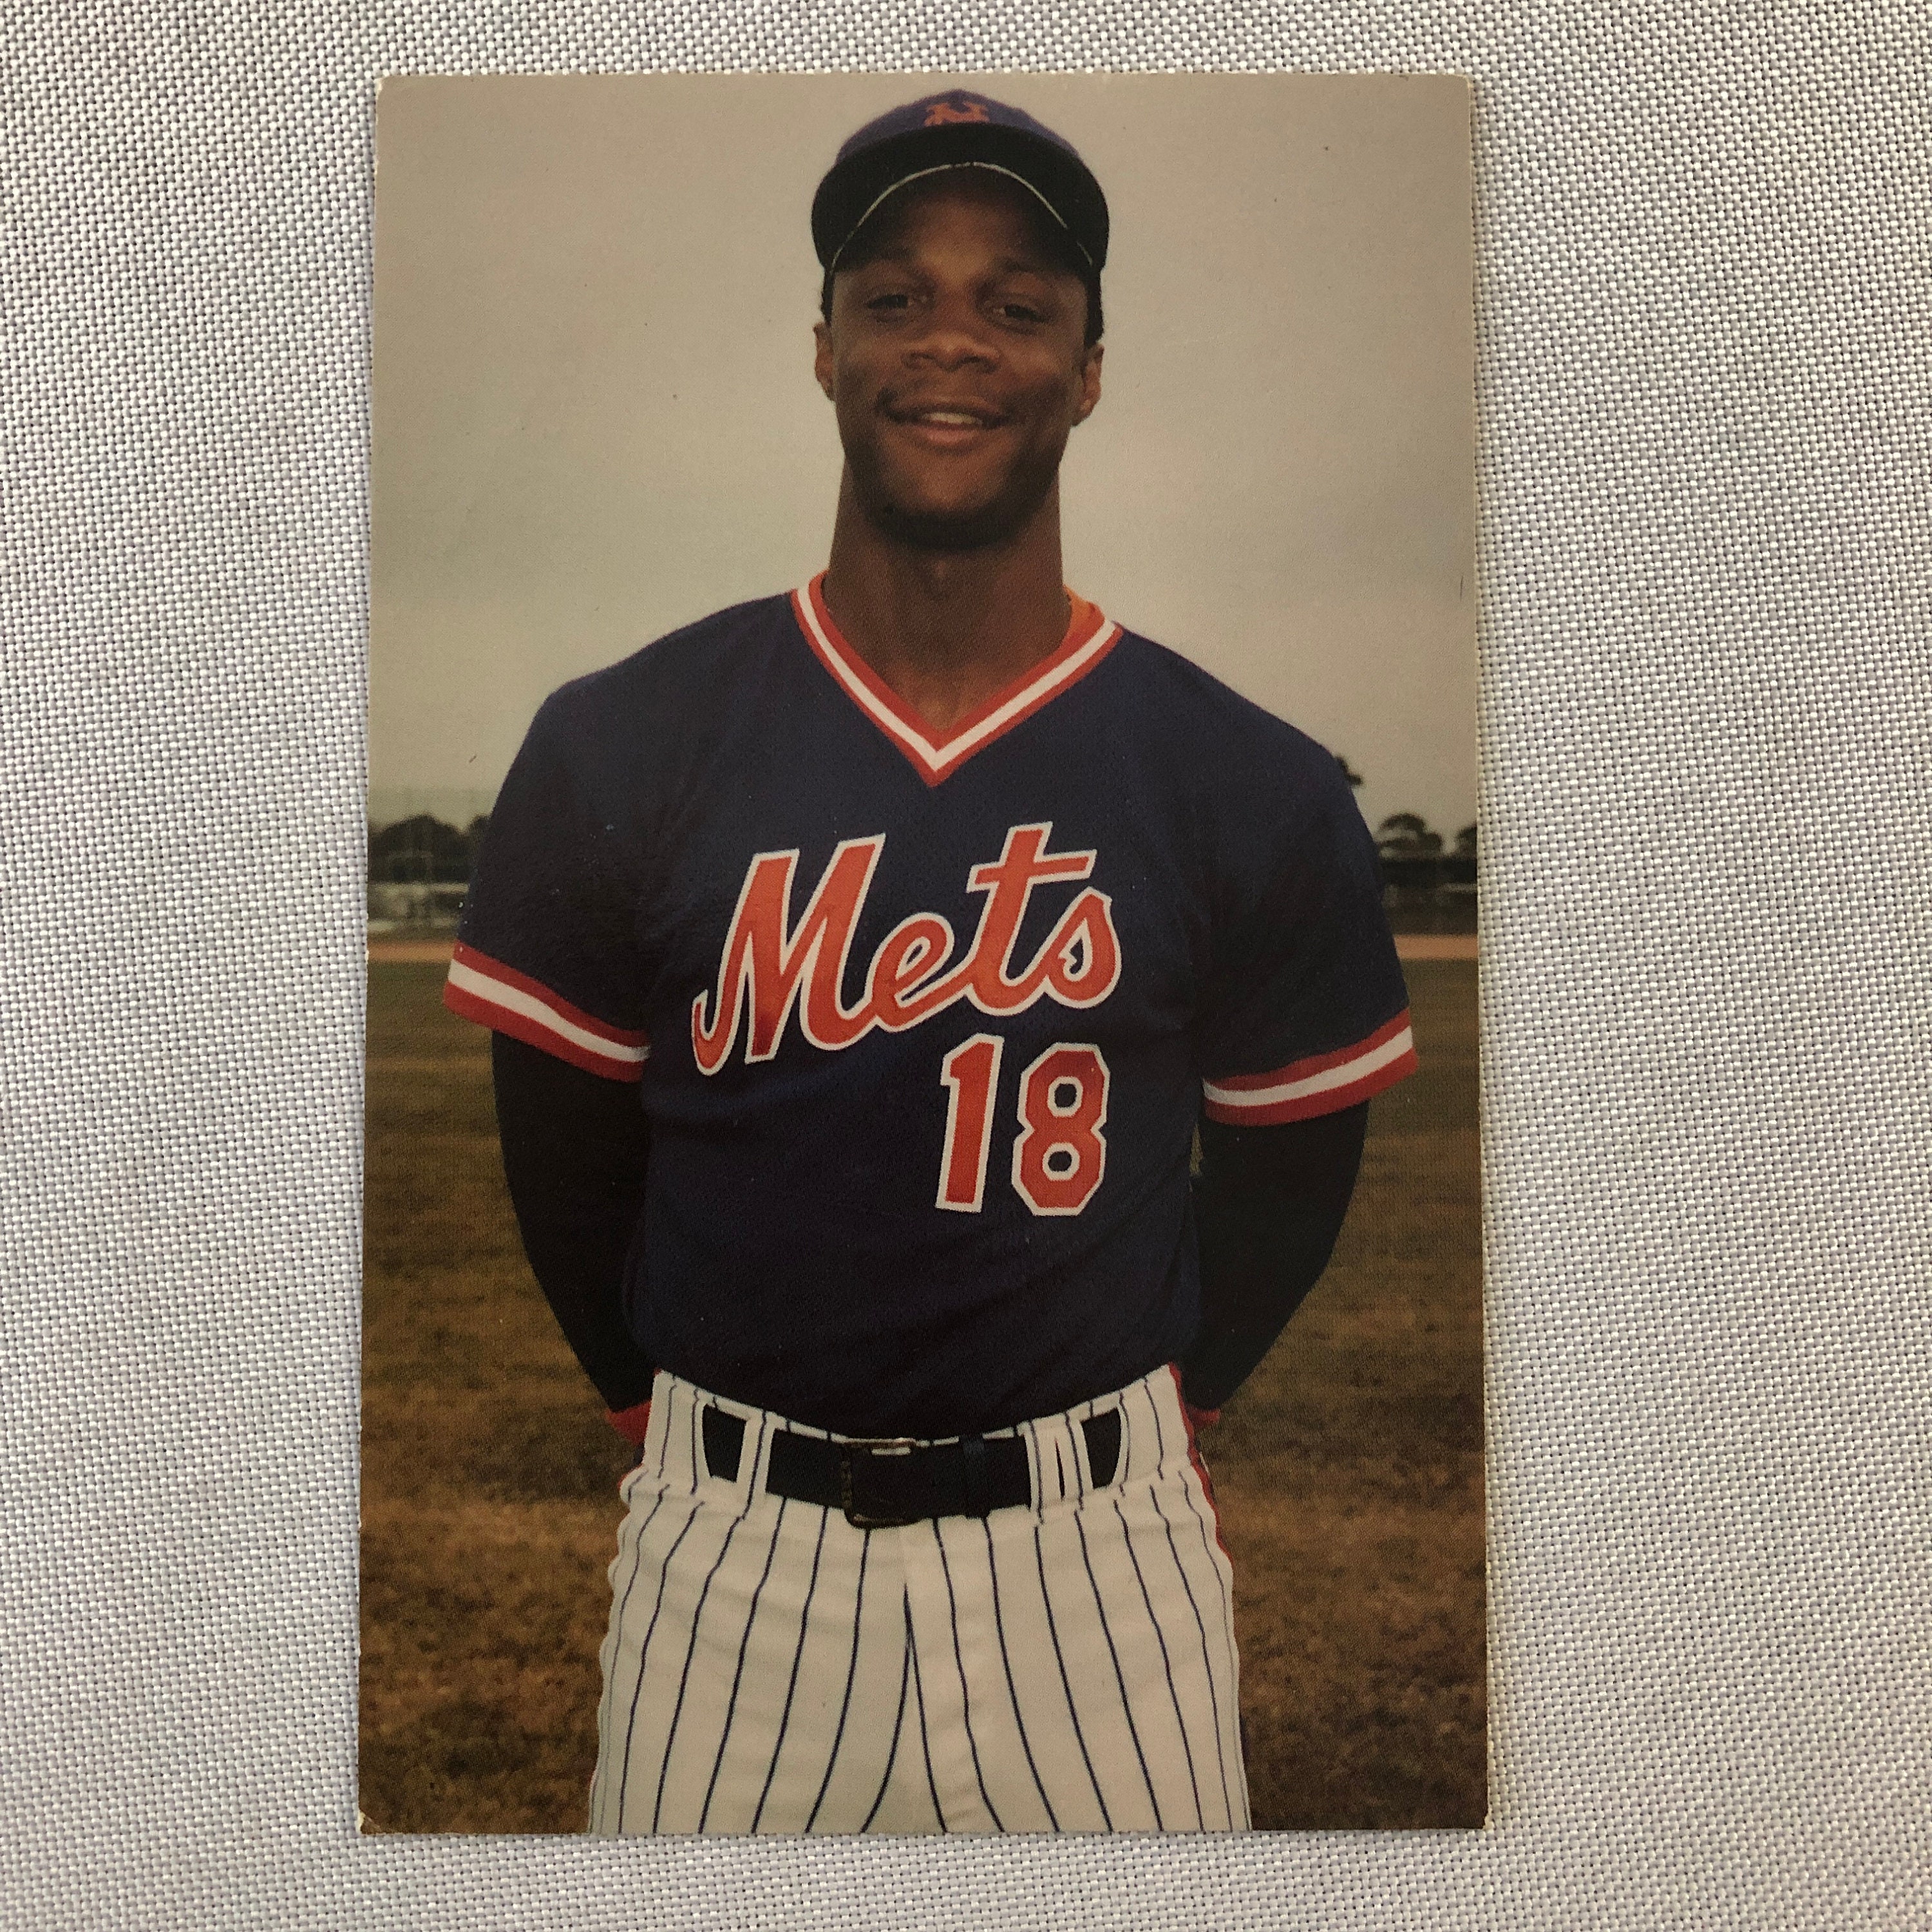 1990 Darryl Strawberry Mets Game-Worn, Signed Jersey